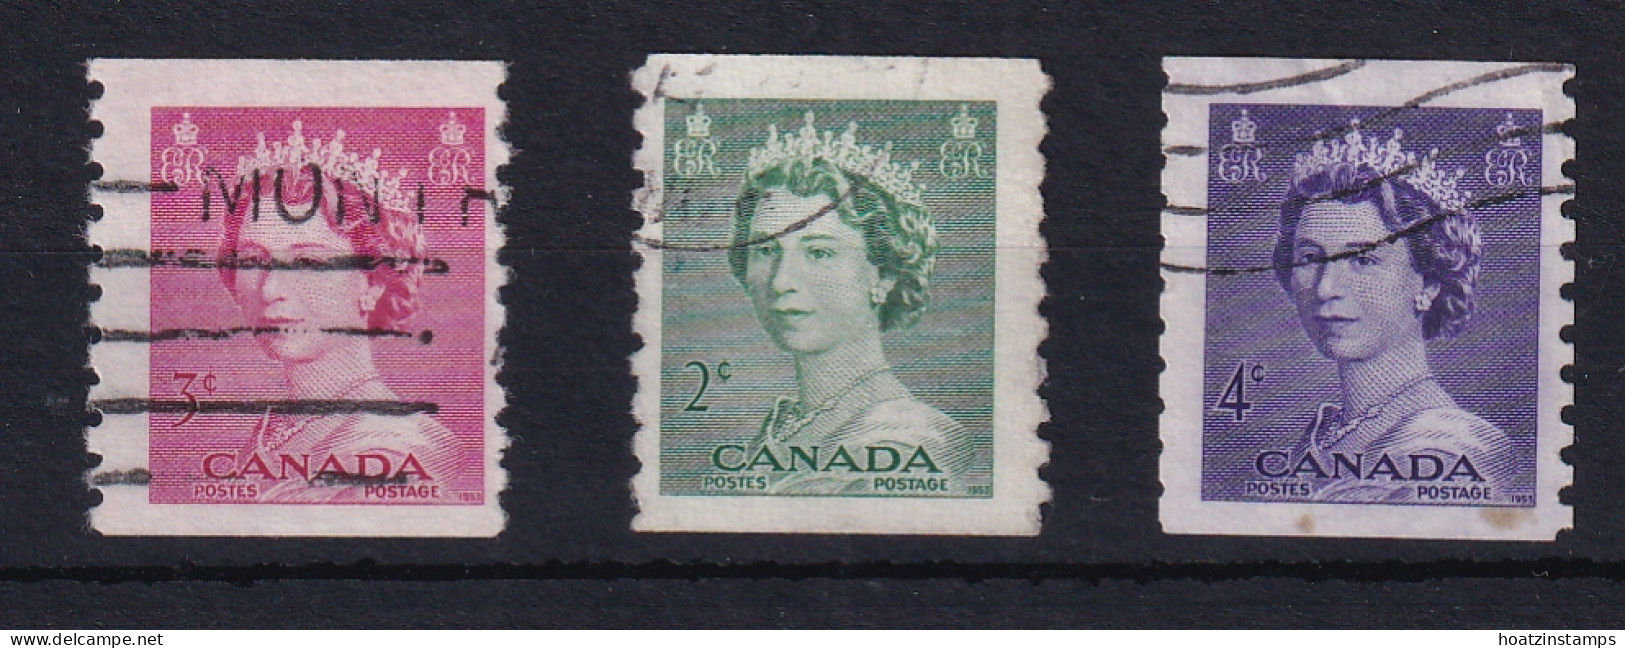 Canada: 1953   QE II - Coil Stamps Set   SG455-457  [Imperf X 9½]   Used - Oblitérés